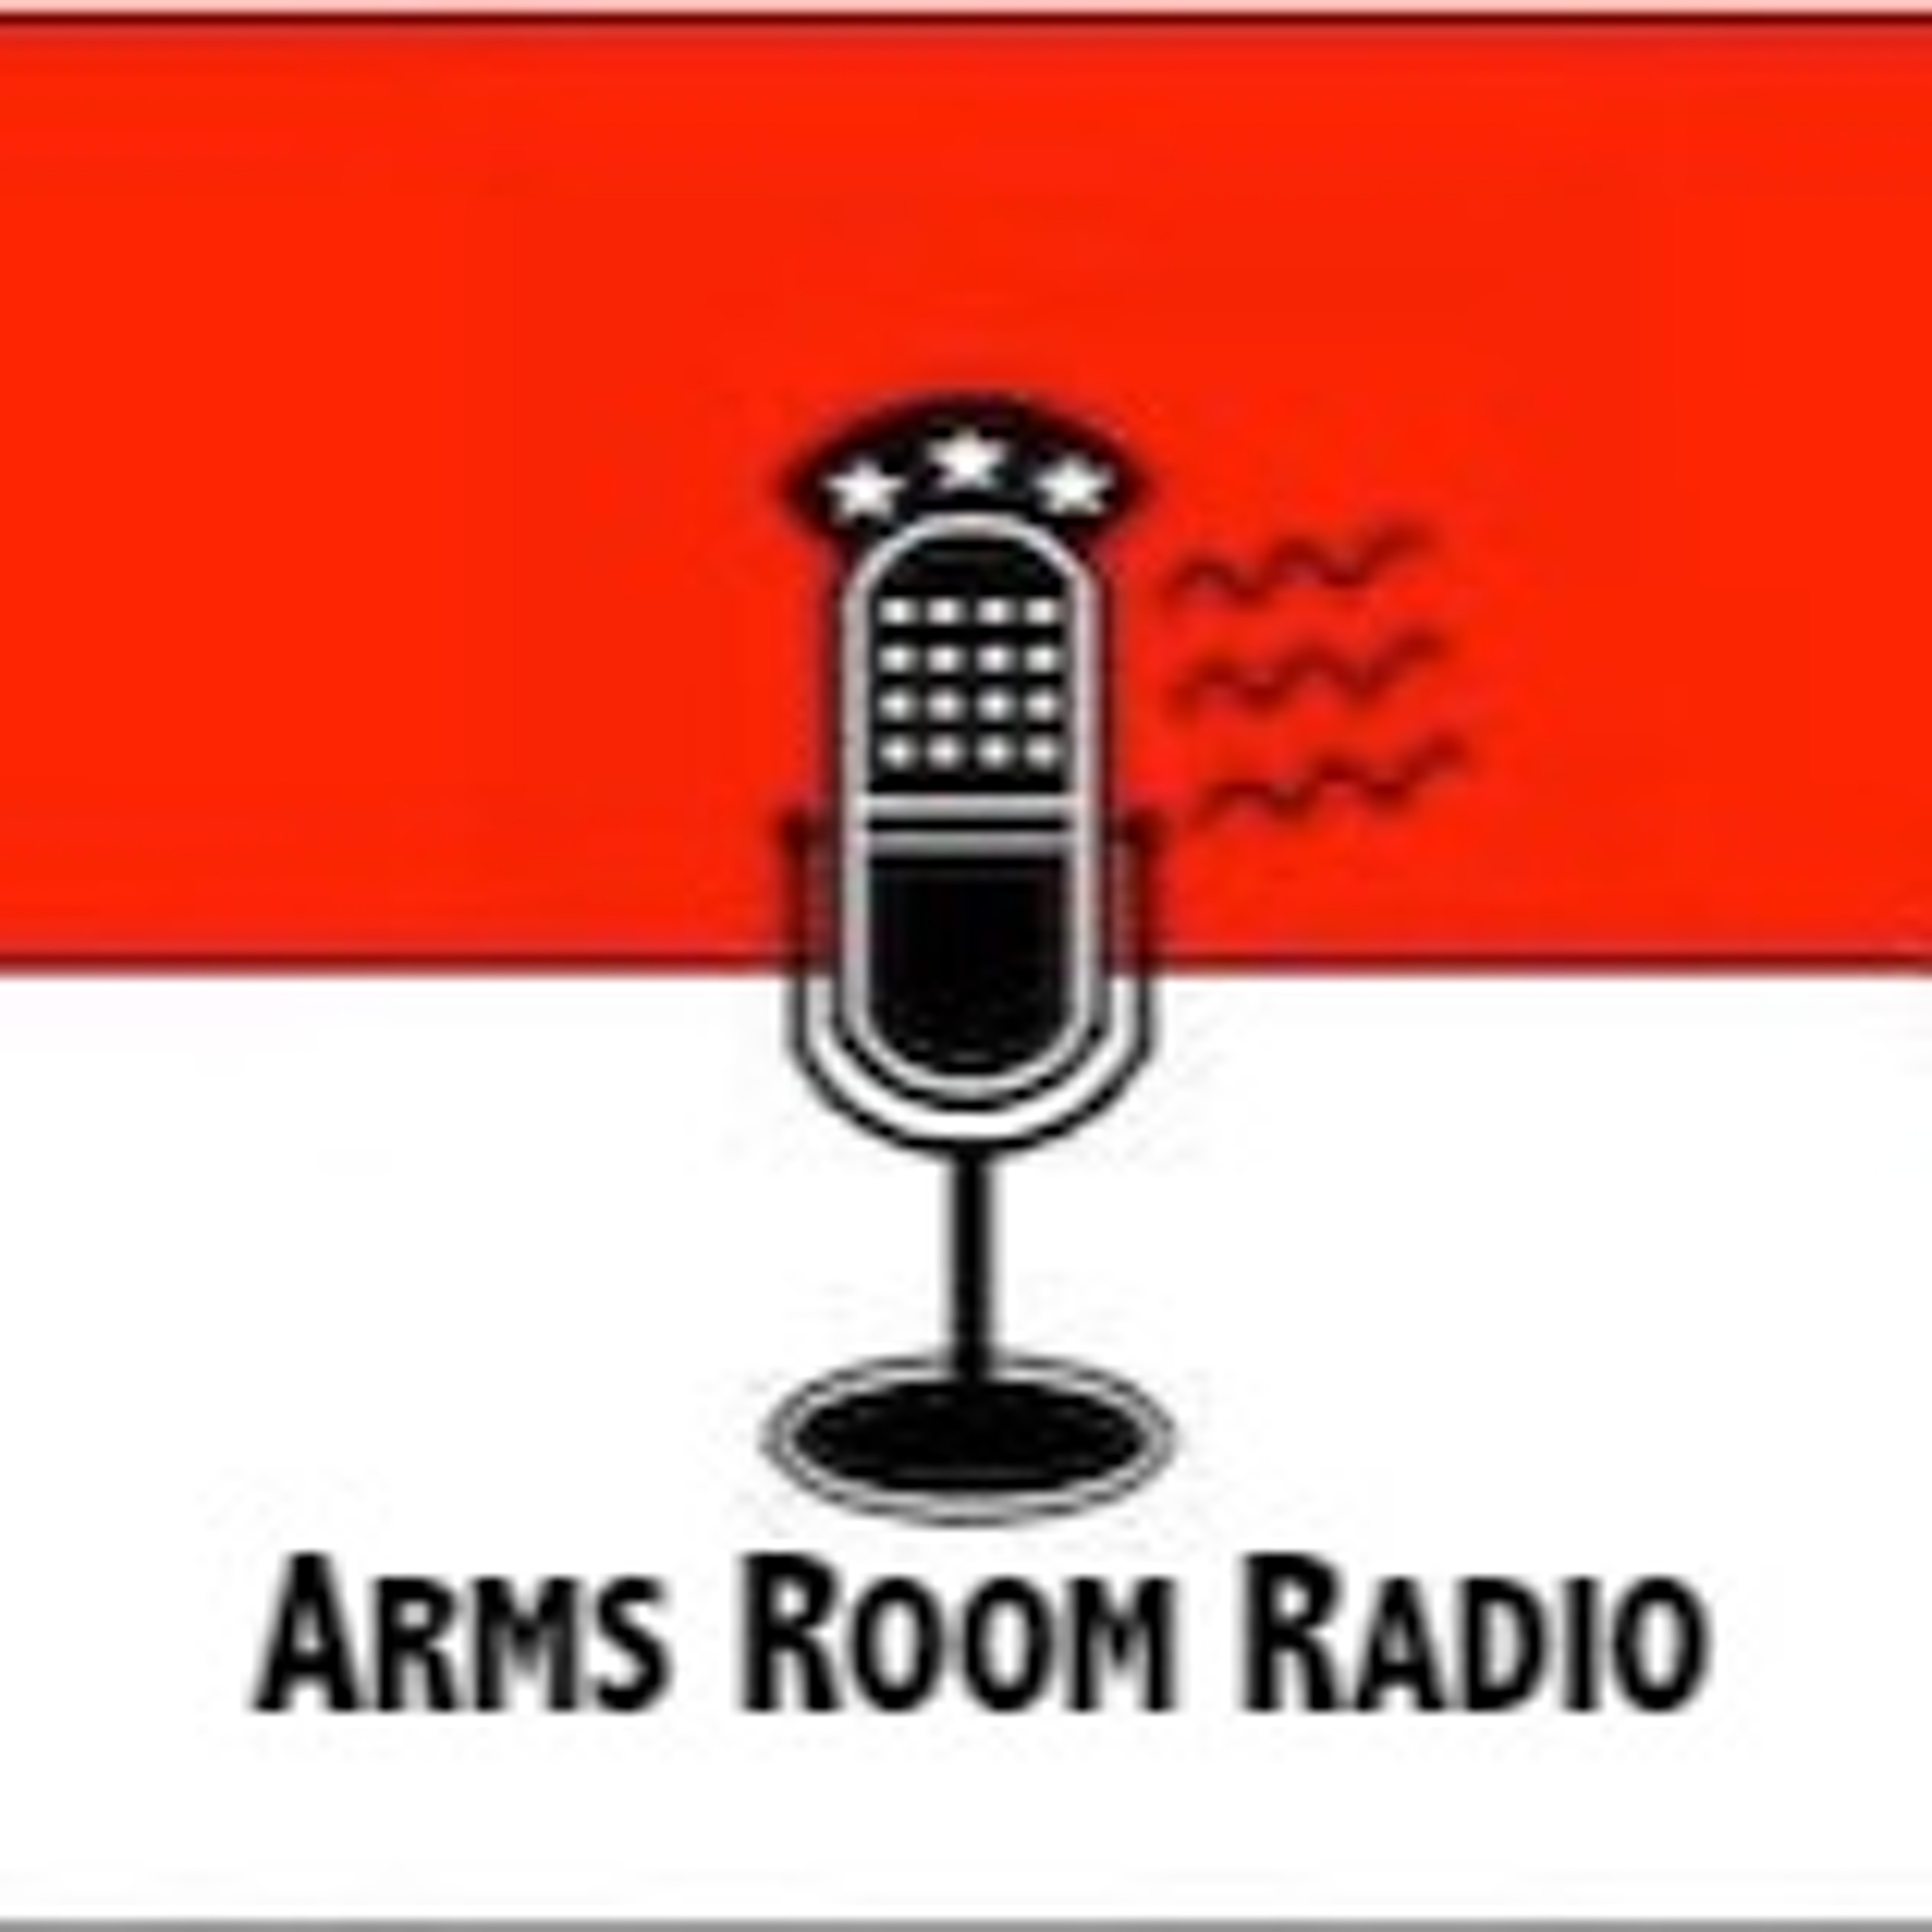 ArmsRoomRadio 06.19.21 Ammo Prices and candidate McCloskey